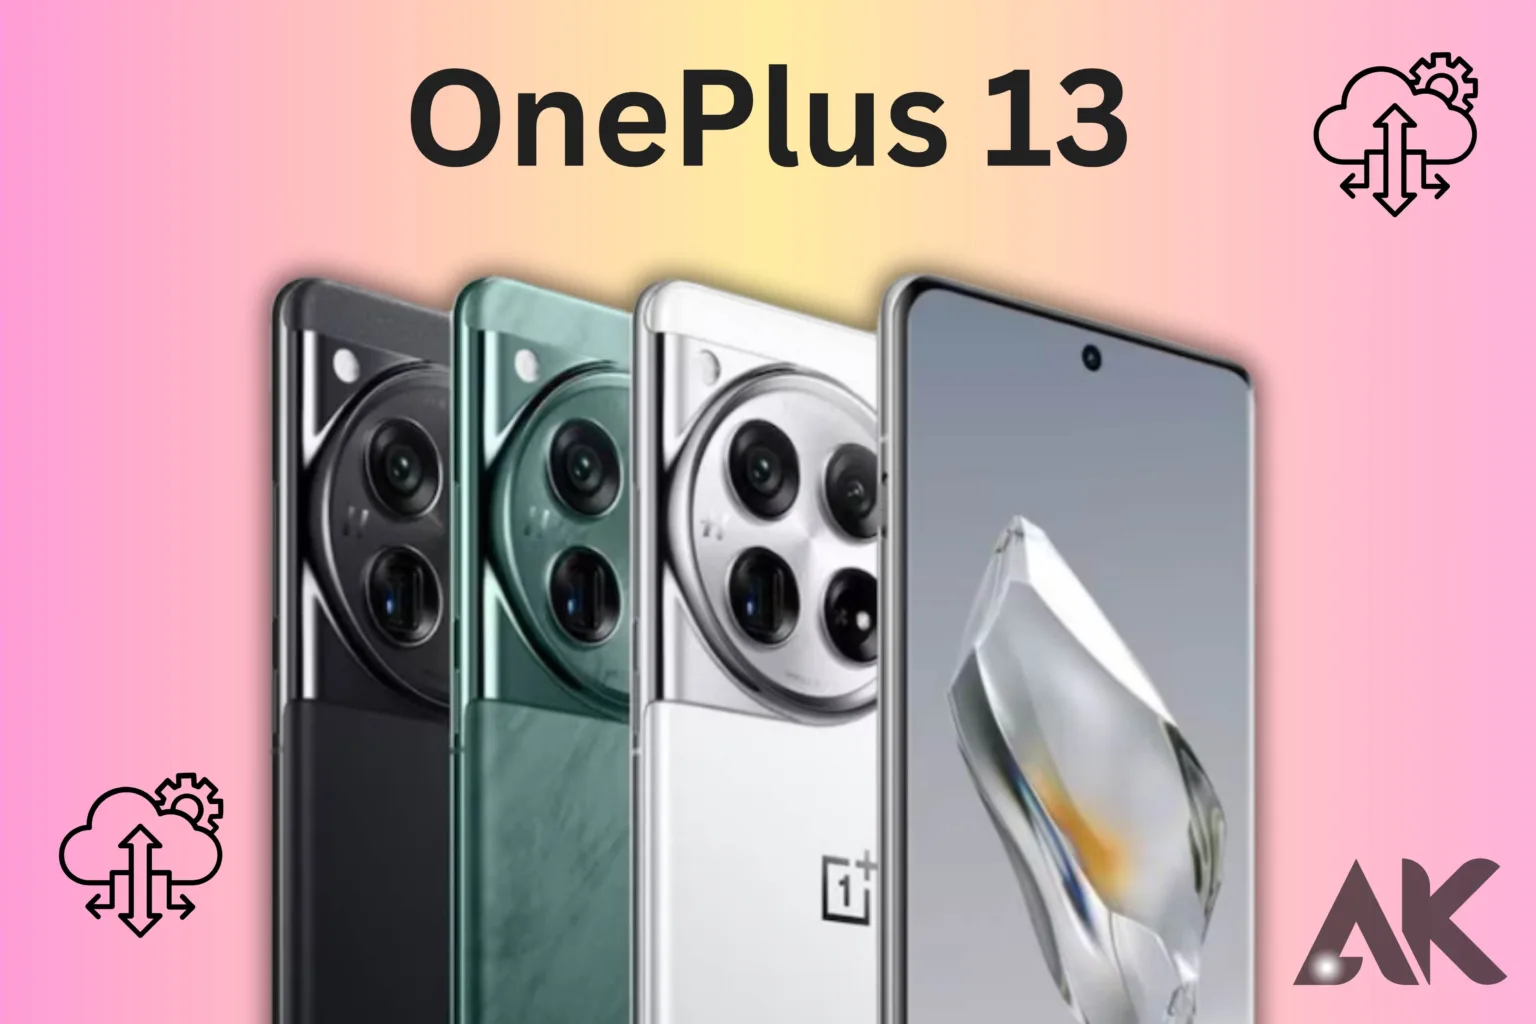 OnePlus 13 features